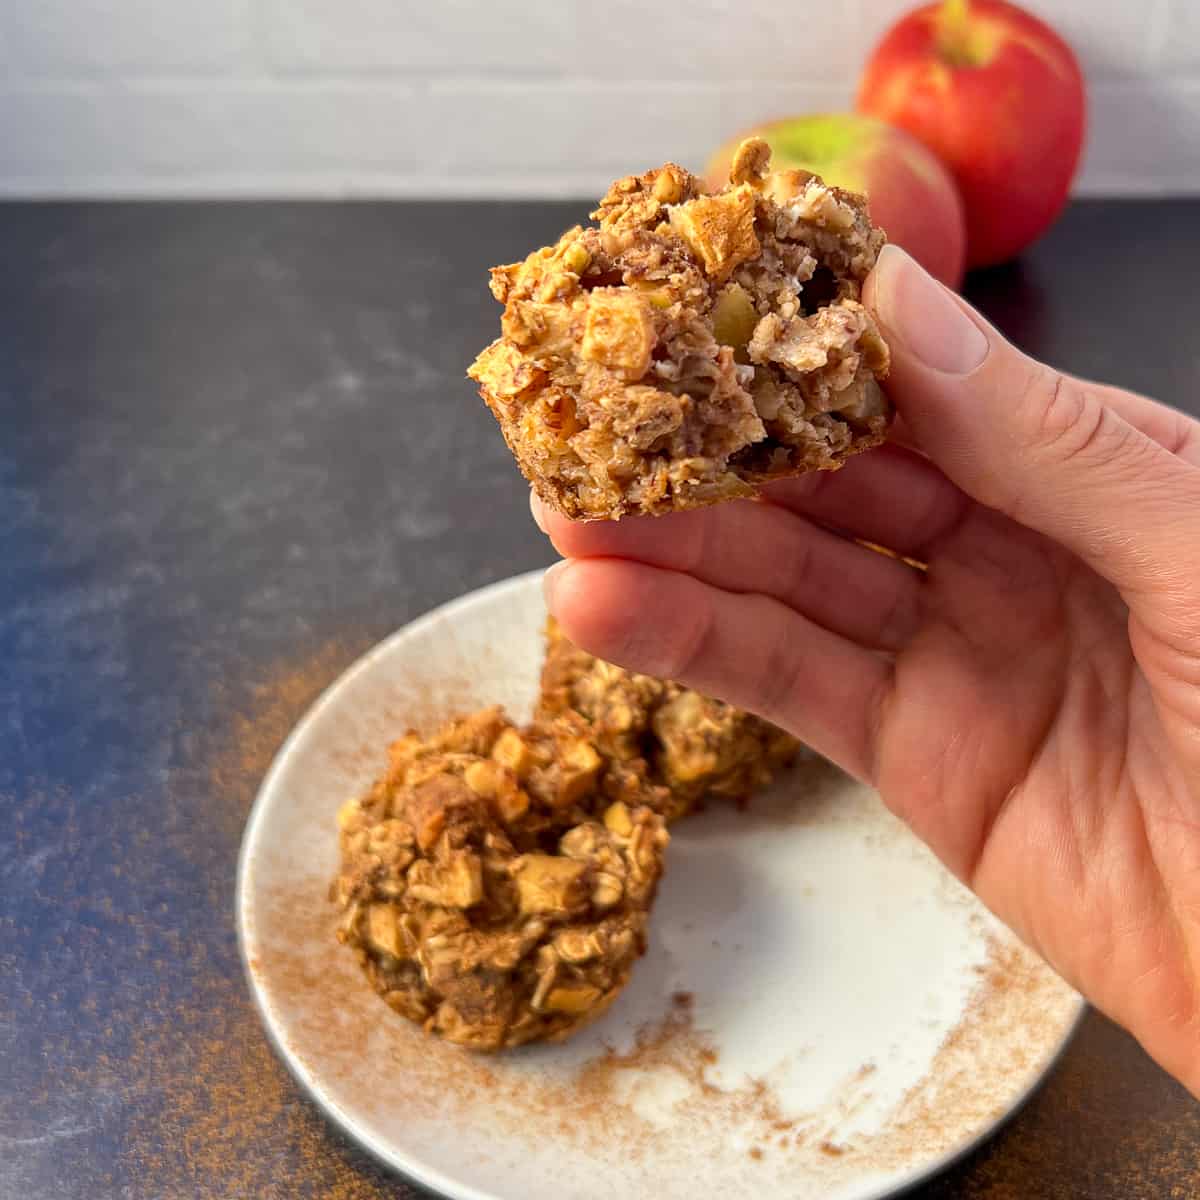 a woman's hand holding a partially eaten apple cinnamon oat muffin with other muffins and apples blurred in the background